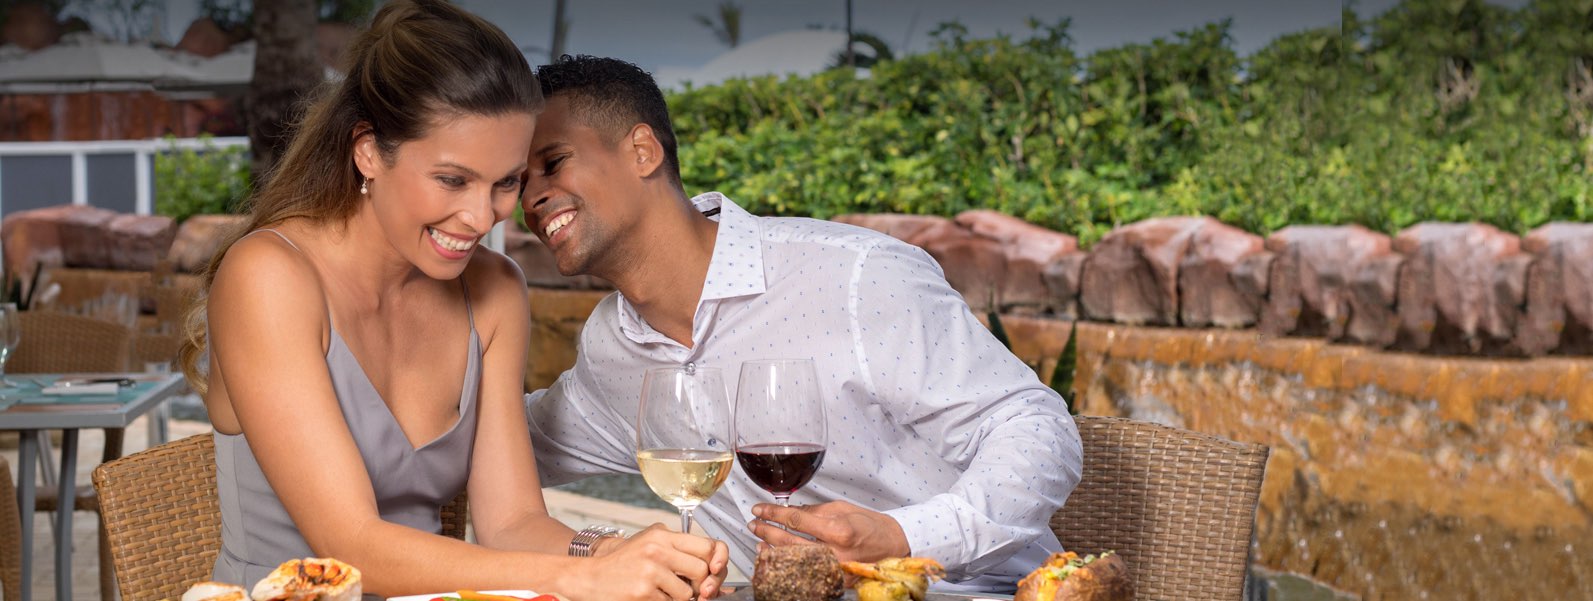 Couple having a romantic dinner with wine